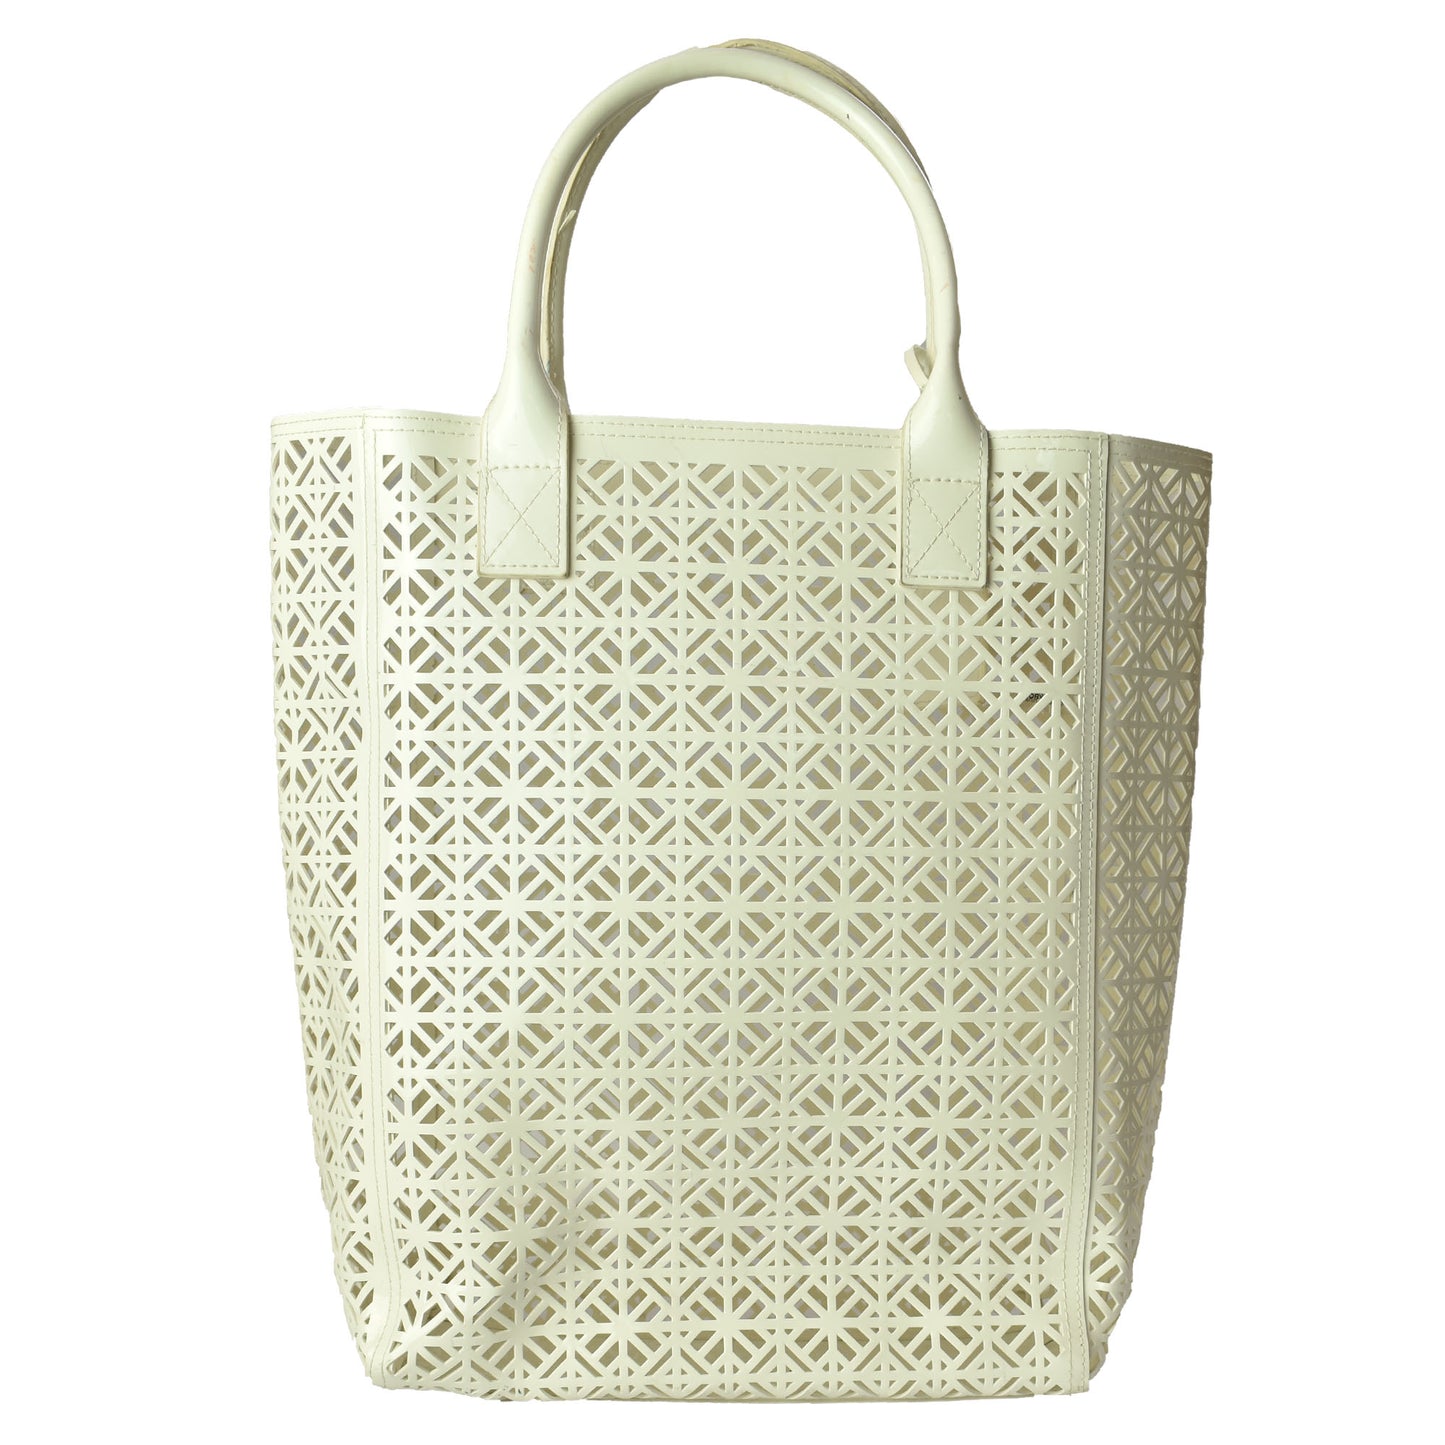 Tory Burch Patent Leather Cutwork Tote Bag